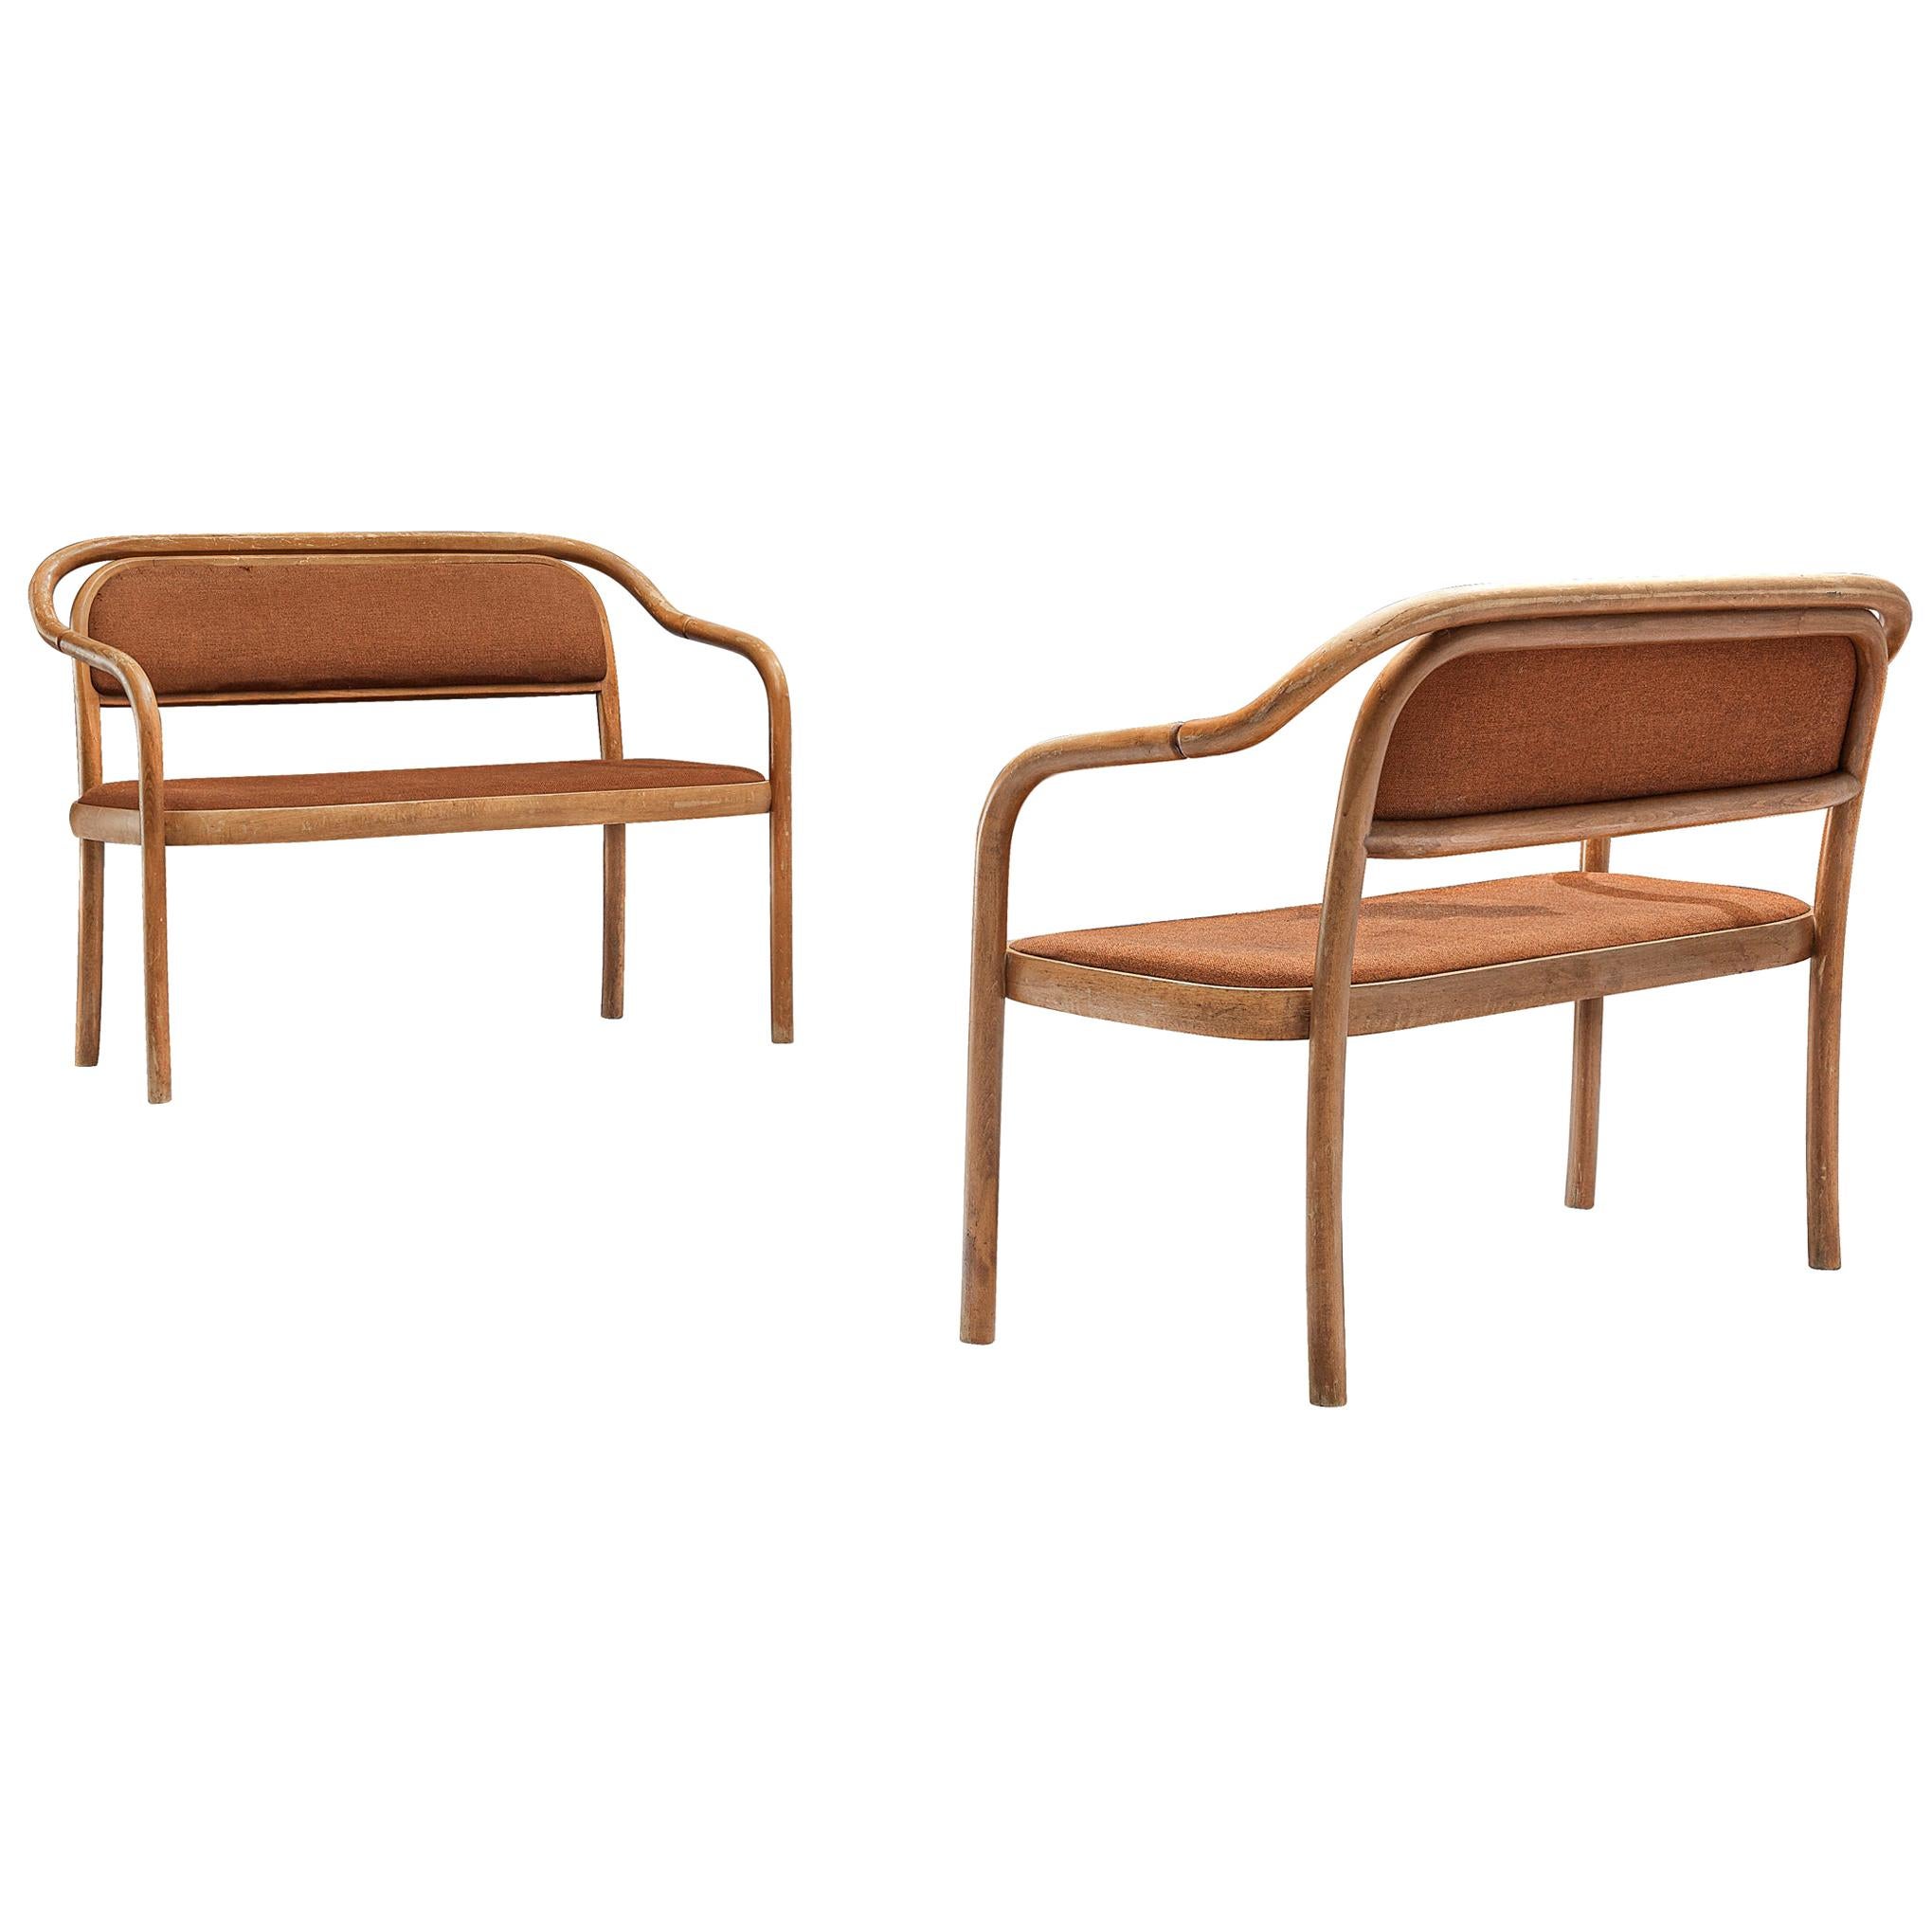 TON, pair of benches, bentwood, fabric upholstery, Czech Republic, 1960s

Pair of benches manufactured by TON in the 1960s. In 1954 Thonet becomes state owned in Czech Republic and was called TON from there on. The benches have a circular bentwood